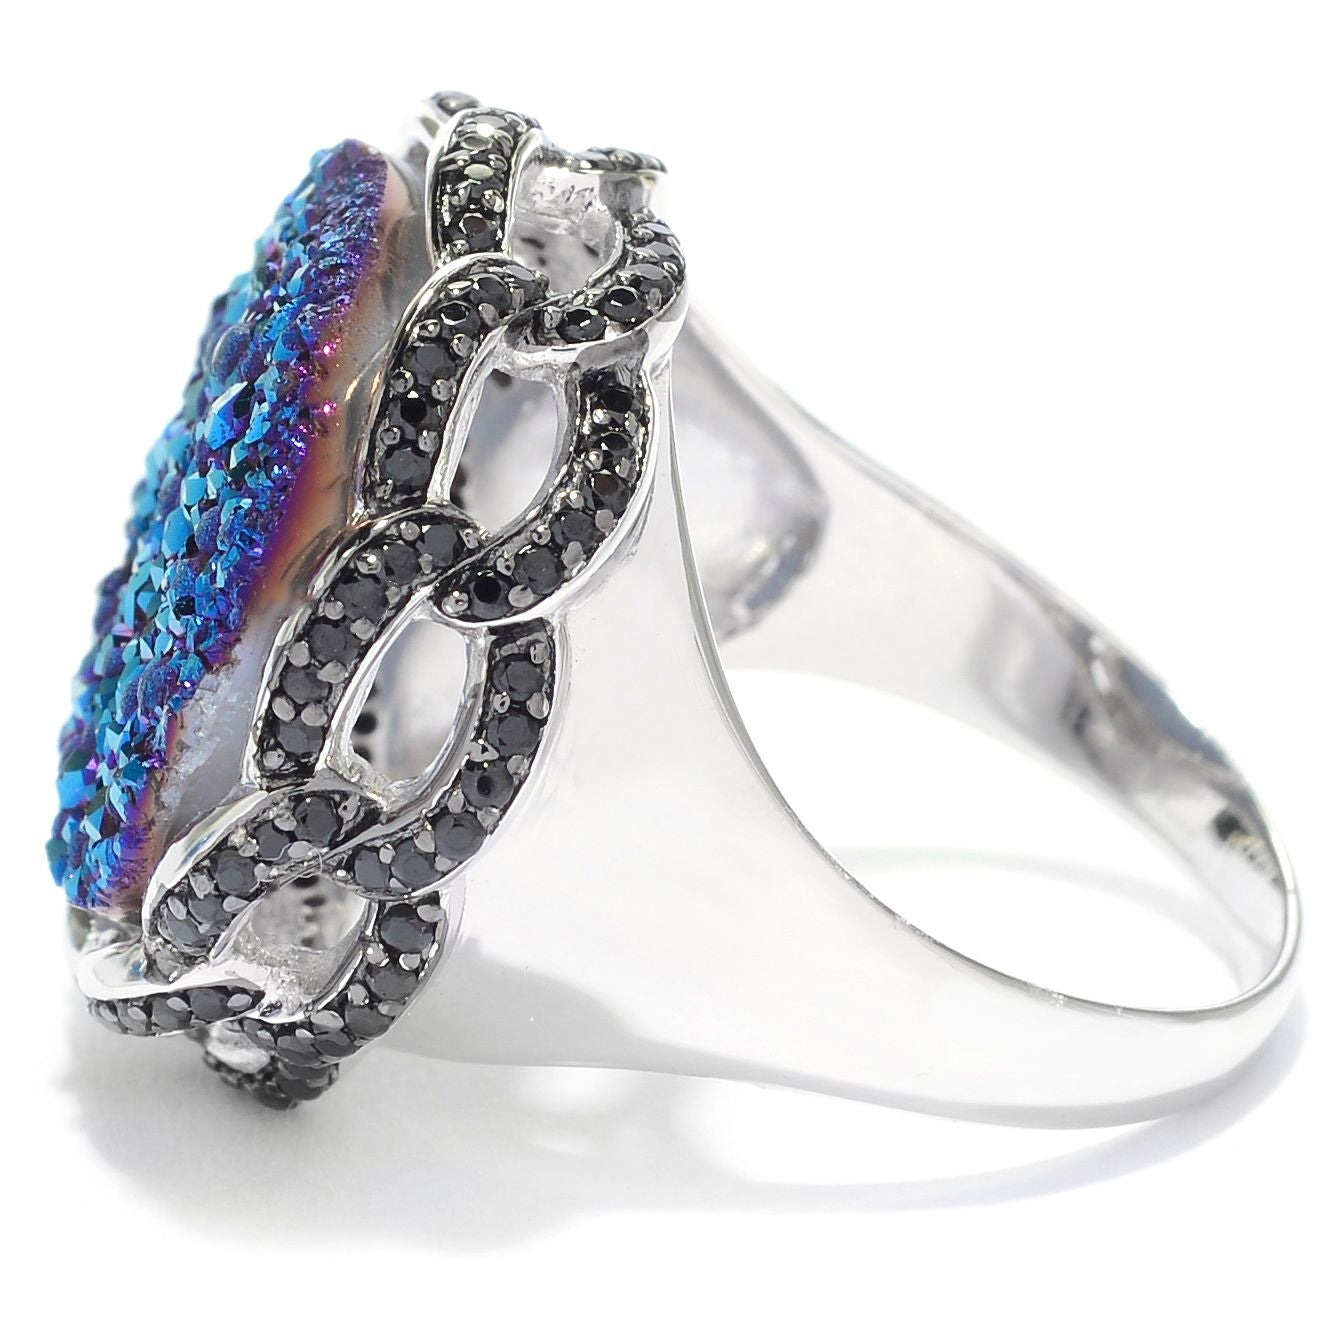 Pinctore 925 Sterling Silver Black Spinel,Blue Drusy Ring